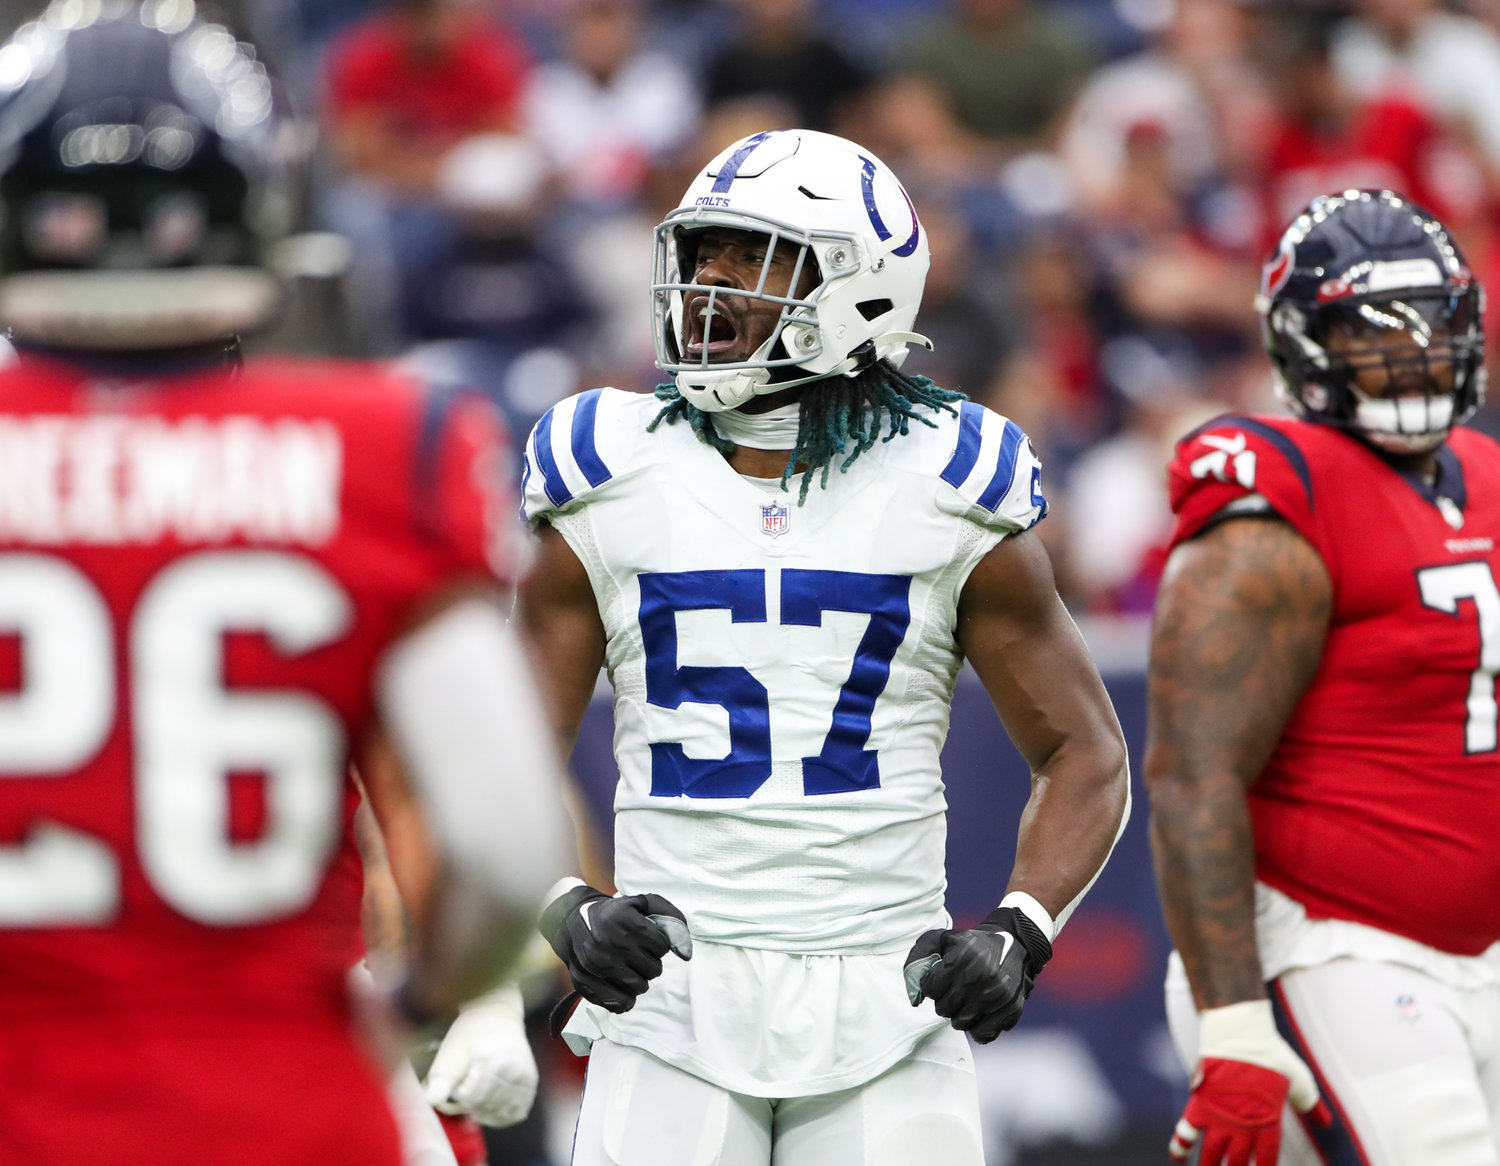 Indianapolis Colts defensive end Kemoko Turay (57) celebrates after a sack during an NFL game between the Texans and the Colts on December 5, 2021 in Houston, Texas.